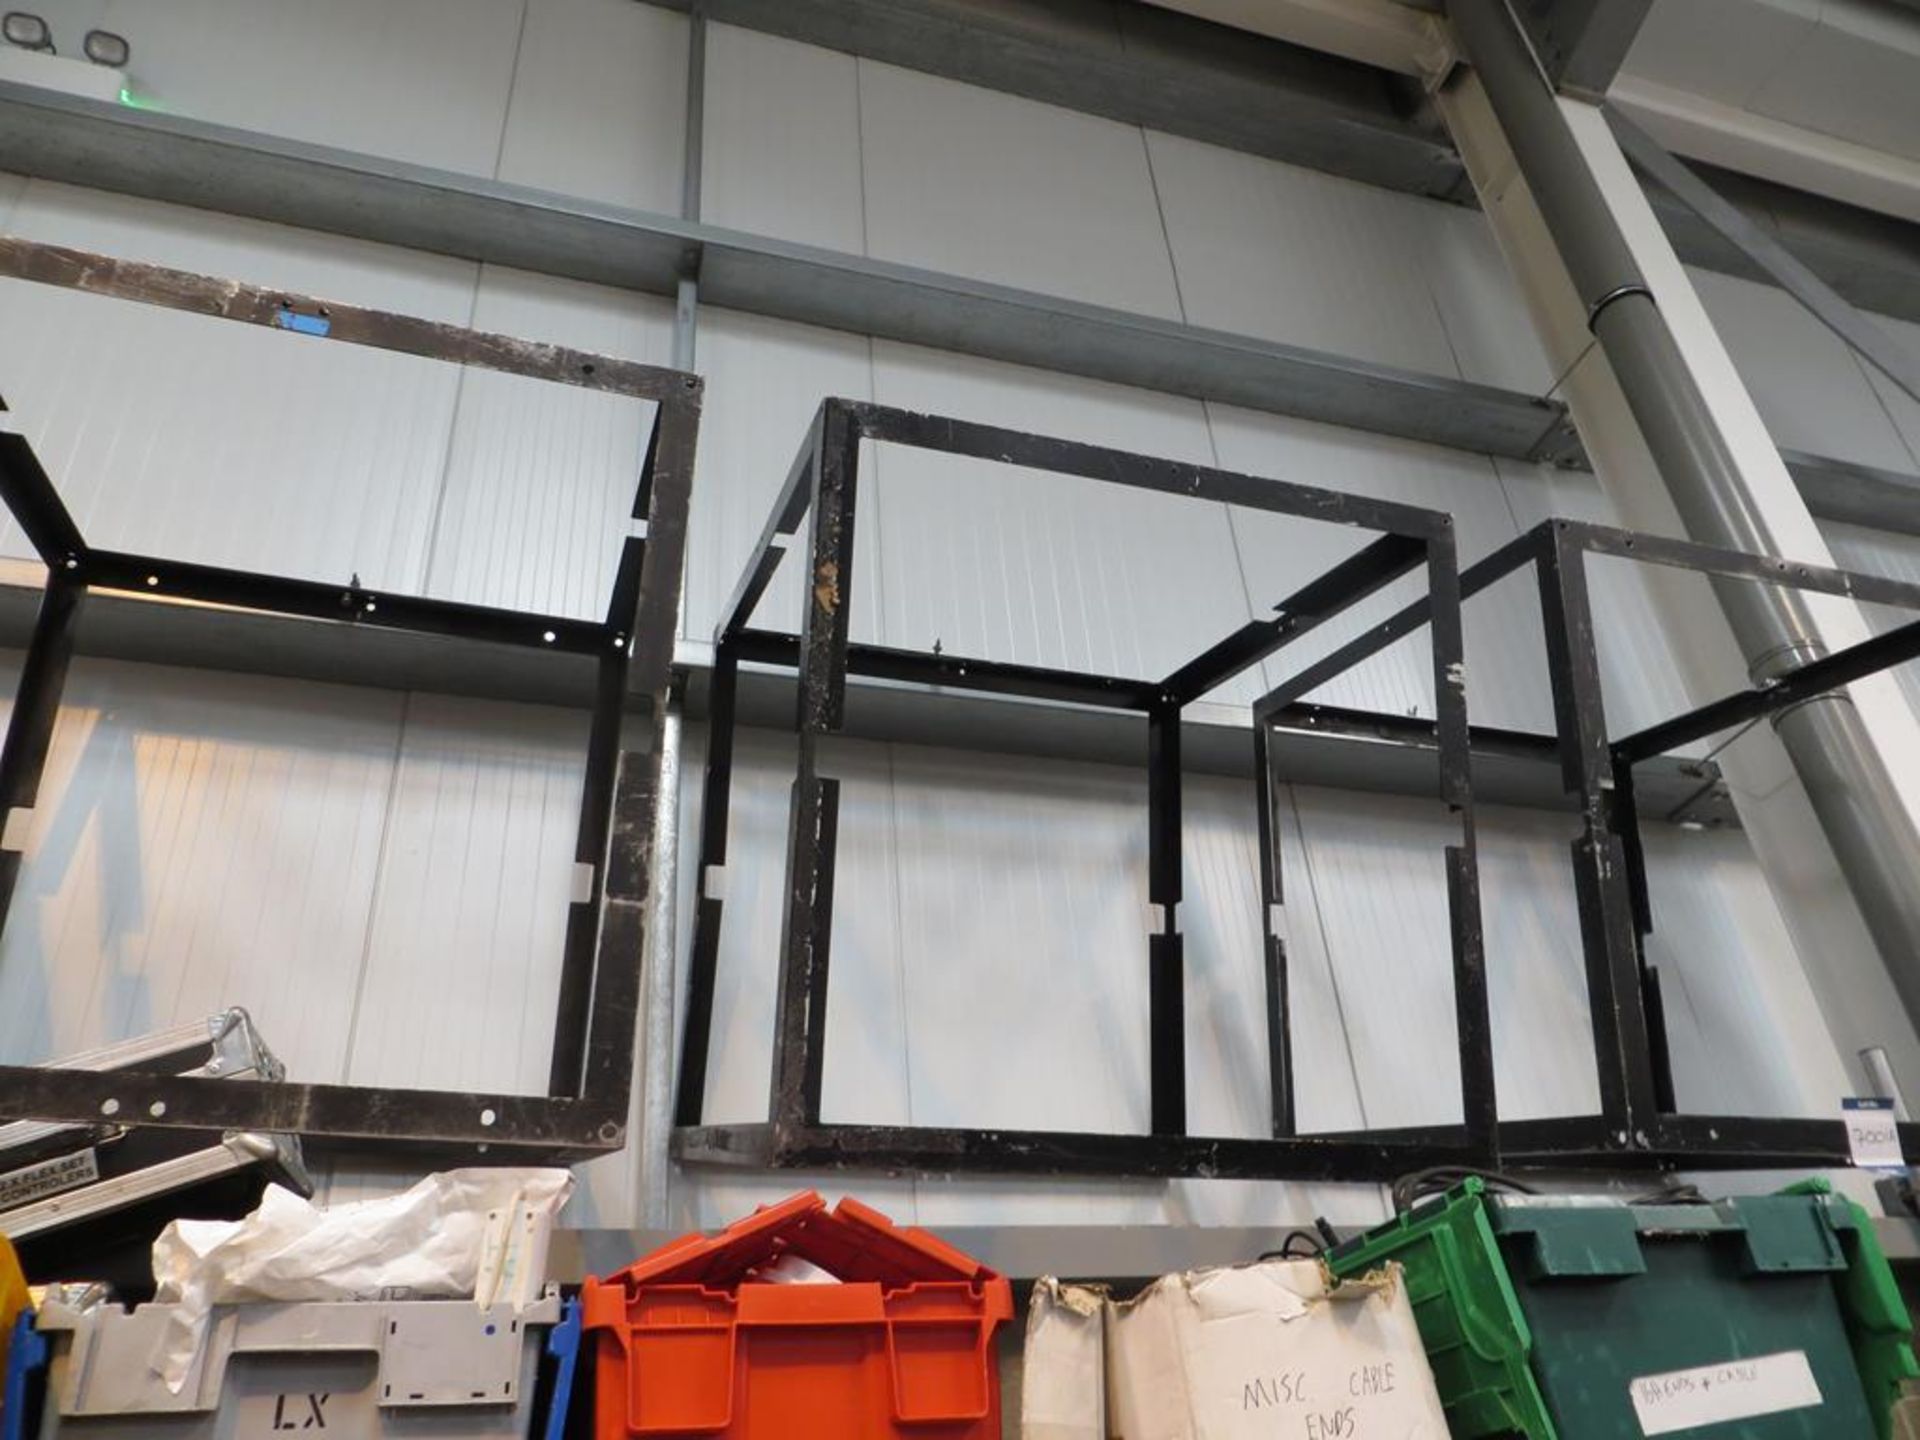 6xNo 1m6x 1m angle steel frames for mounting Glux panels with mounting bolts in transit case: - Image 2 of 3